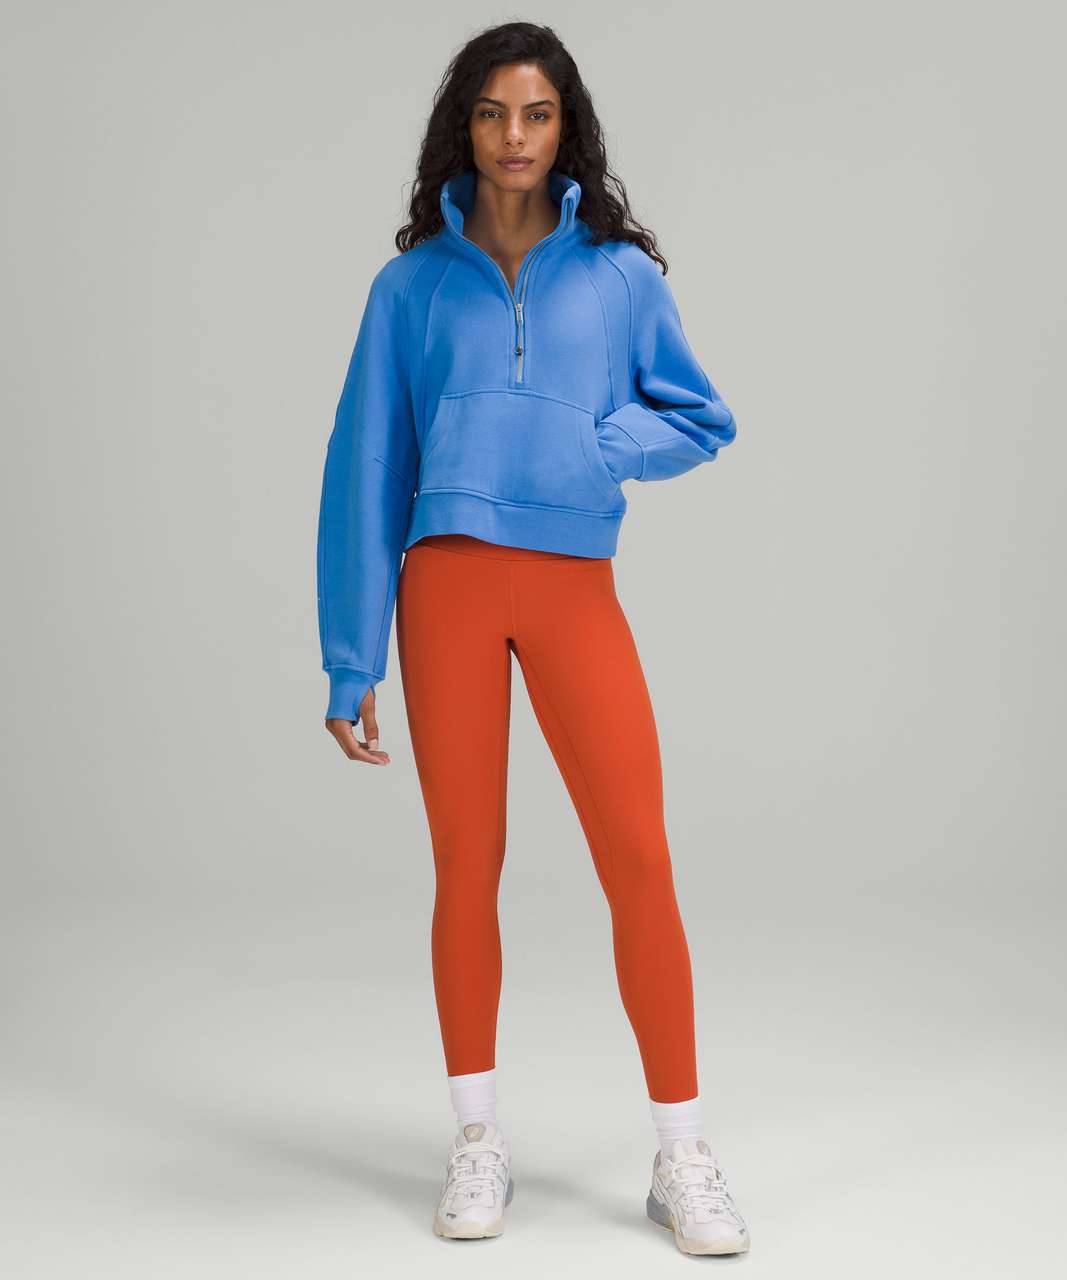 Sold Out Define Jacket in Blue Nile  Lululemon outfits, Cute running  outfit, Comfy summer outfits